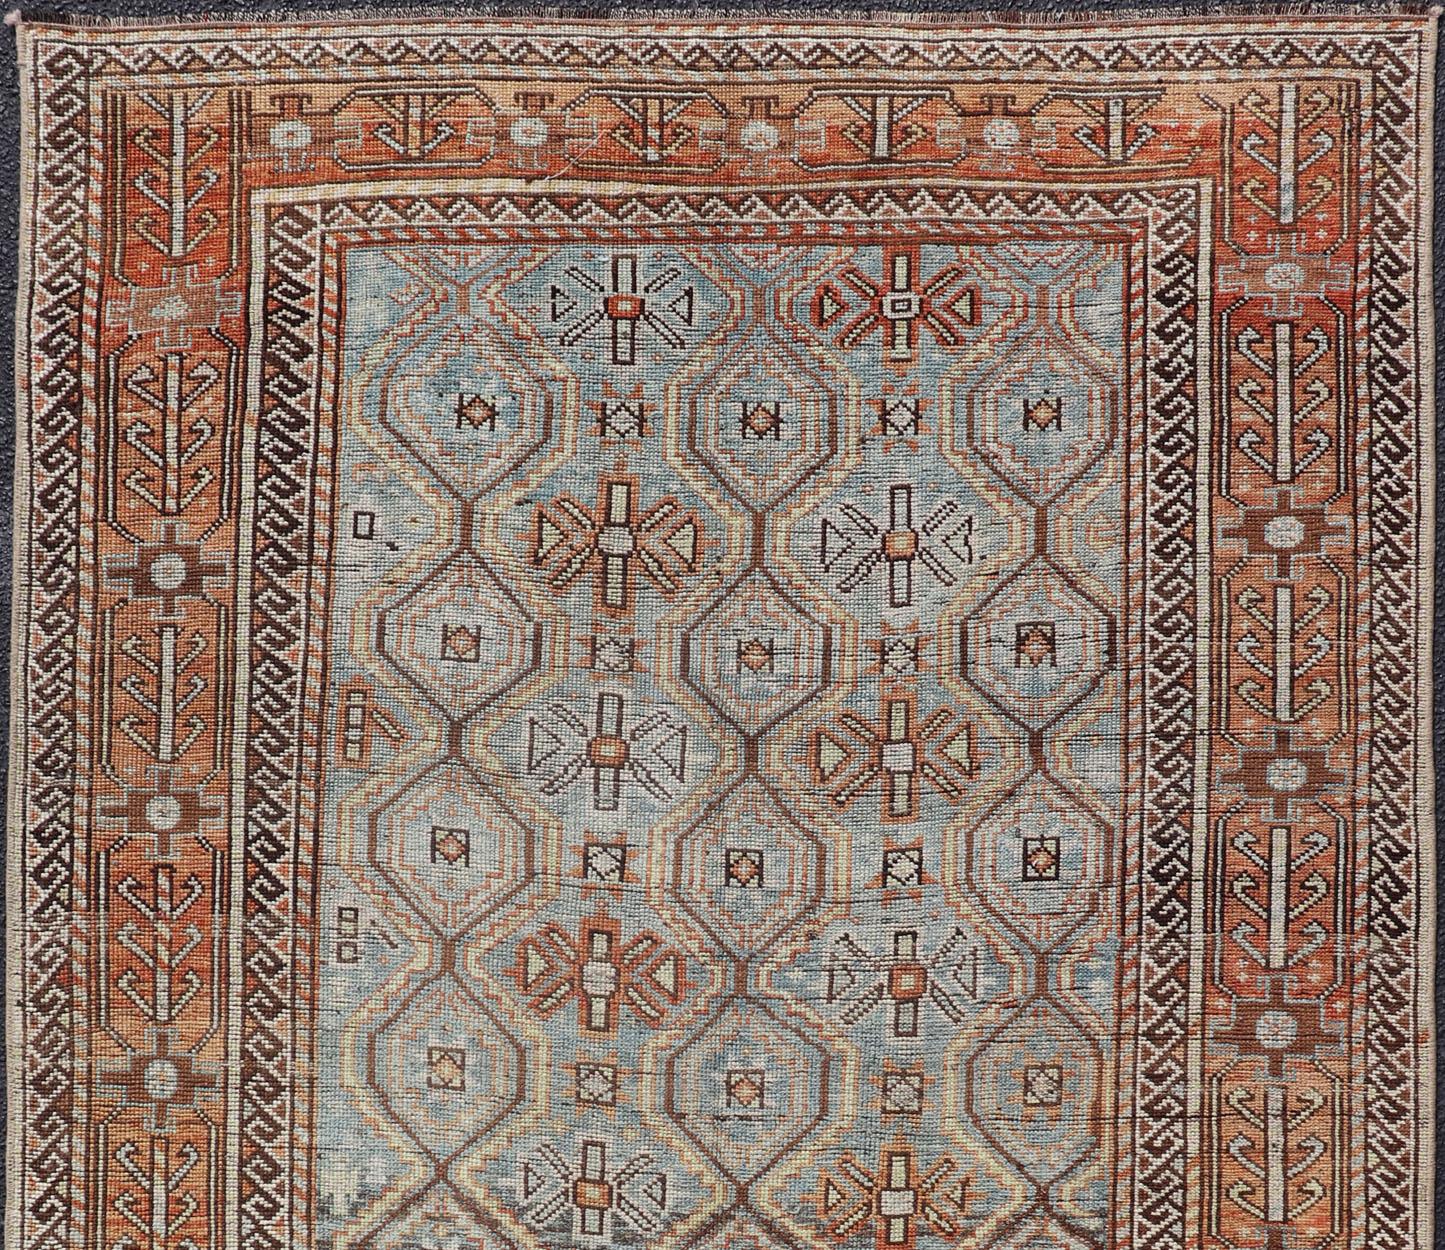 Softly colored antique Persian Kurdish with all-over tribal design, rug SUS-2012-1017, country of origin / type: Iran / Kurdish, circa 1900.

This antique Kurdish tribal rug was woven by Kurdish weavers in western Persia. Often they used this